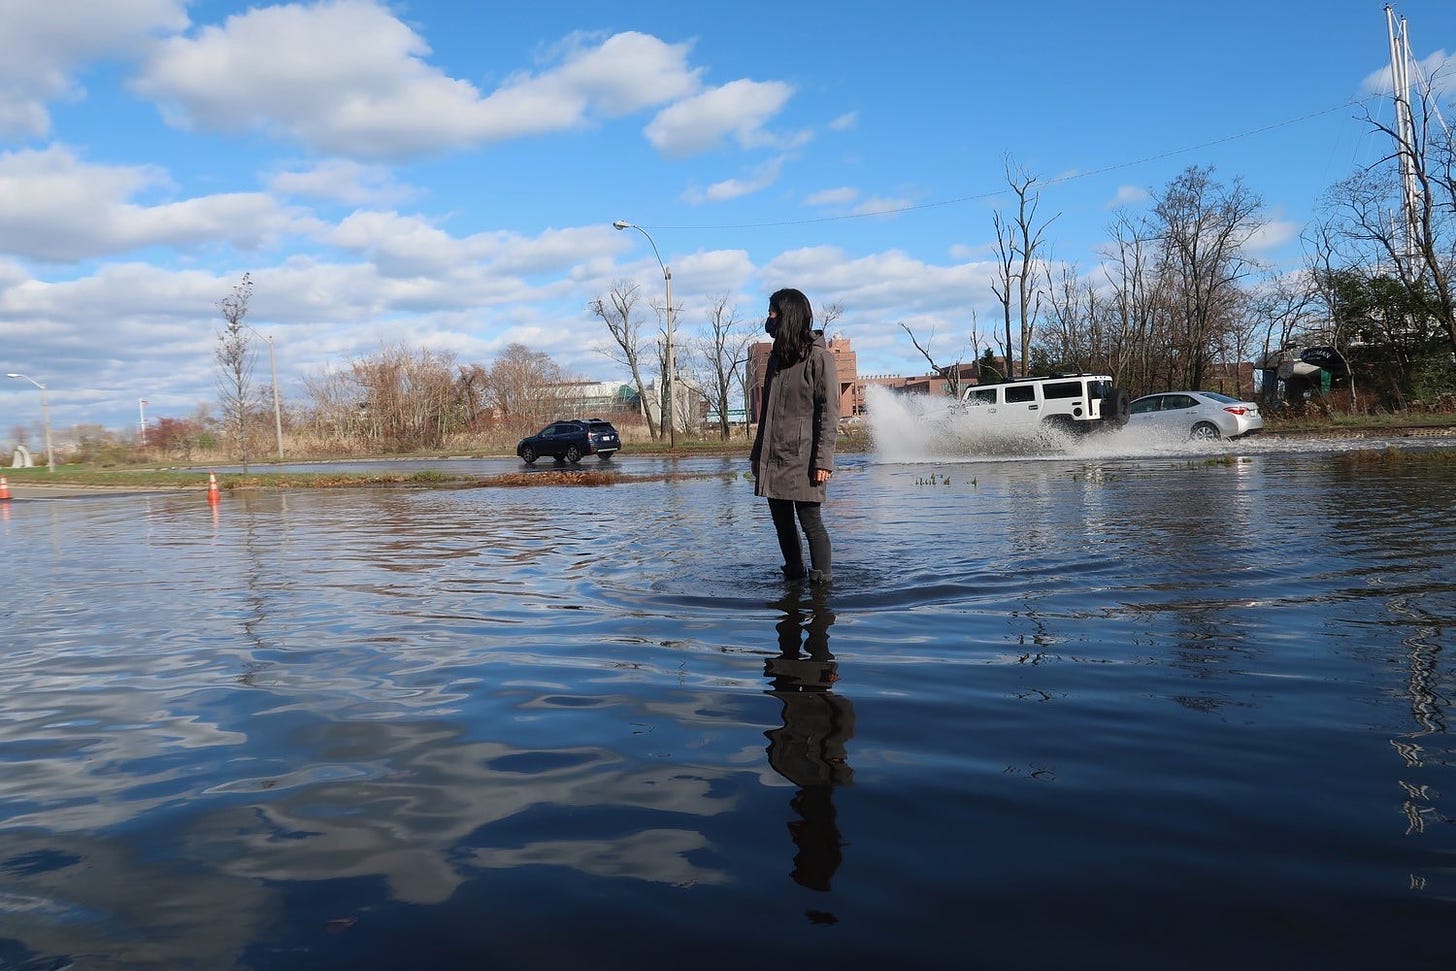 Michelle stands in ankle deep water looking both ways to cross a completely flooded Morrissey Blvd under blue skies